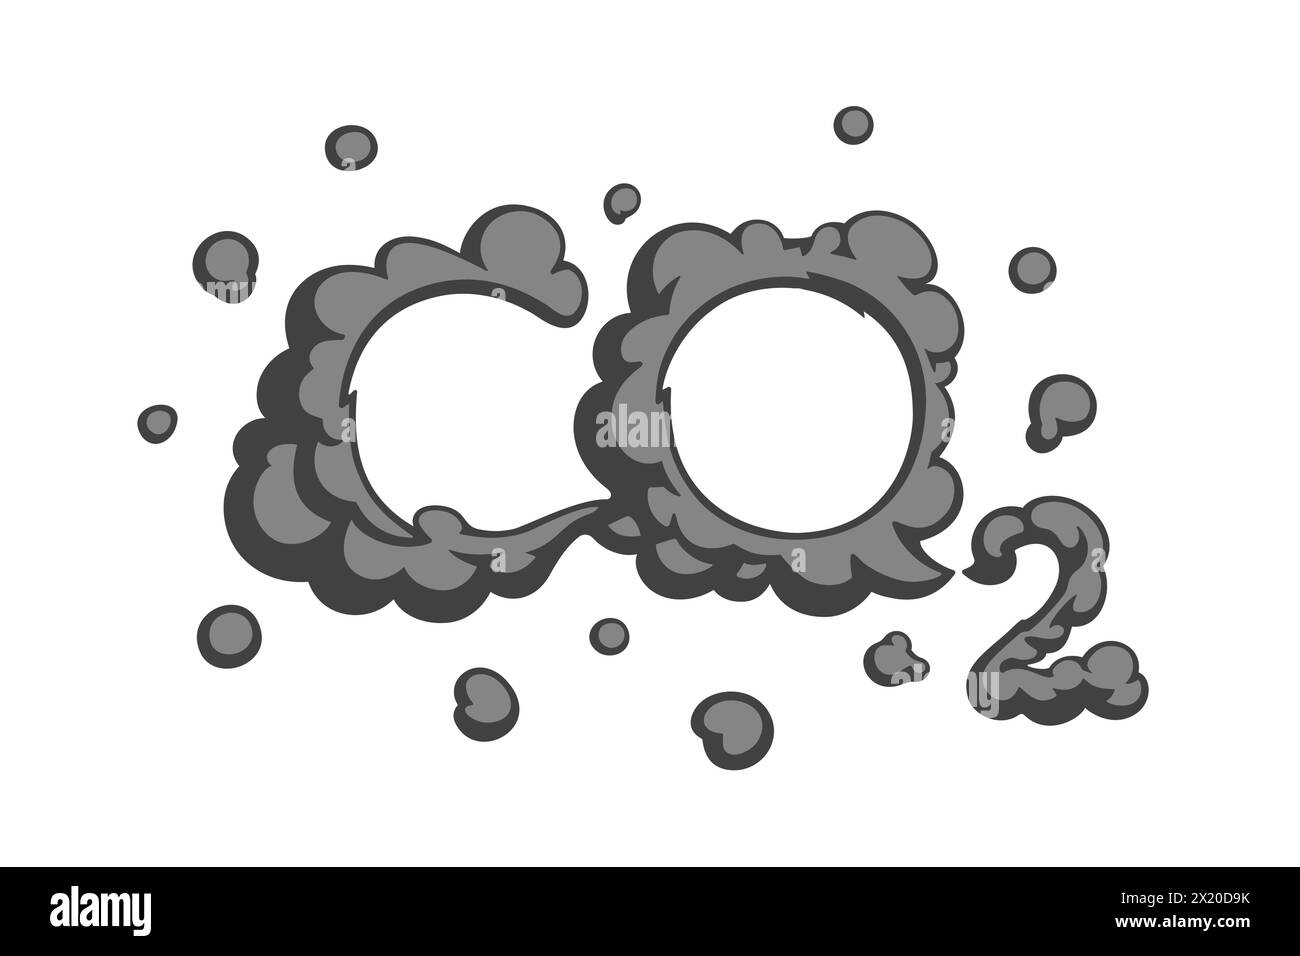 CO2 emissions vector symbol. Air pollution. Environment pollution concept. Isolated on white background. Stock Vector